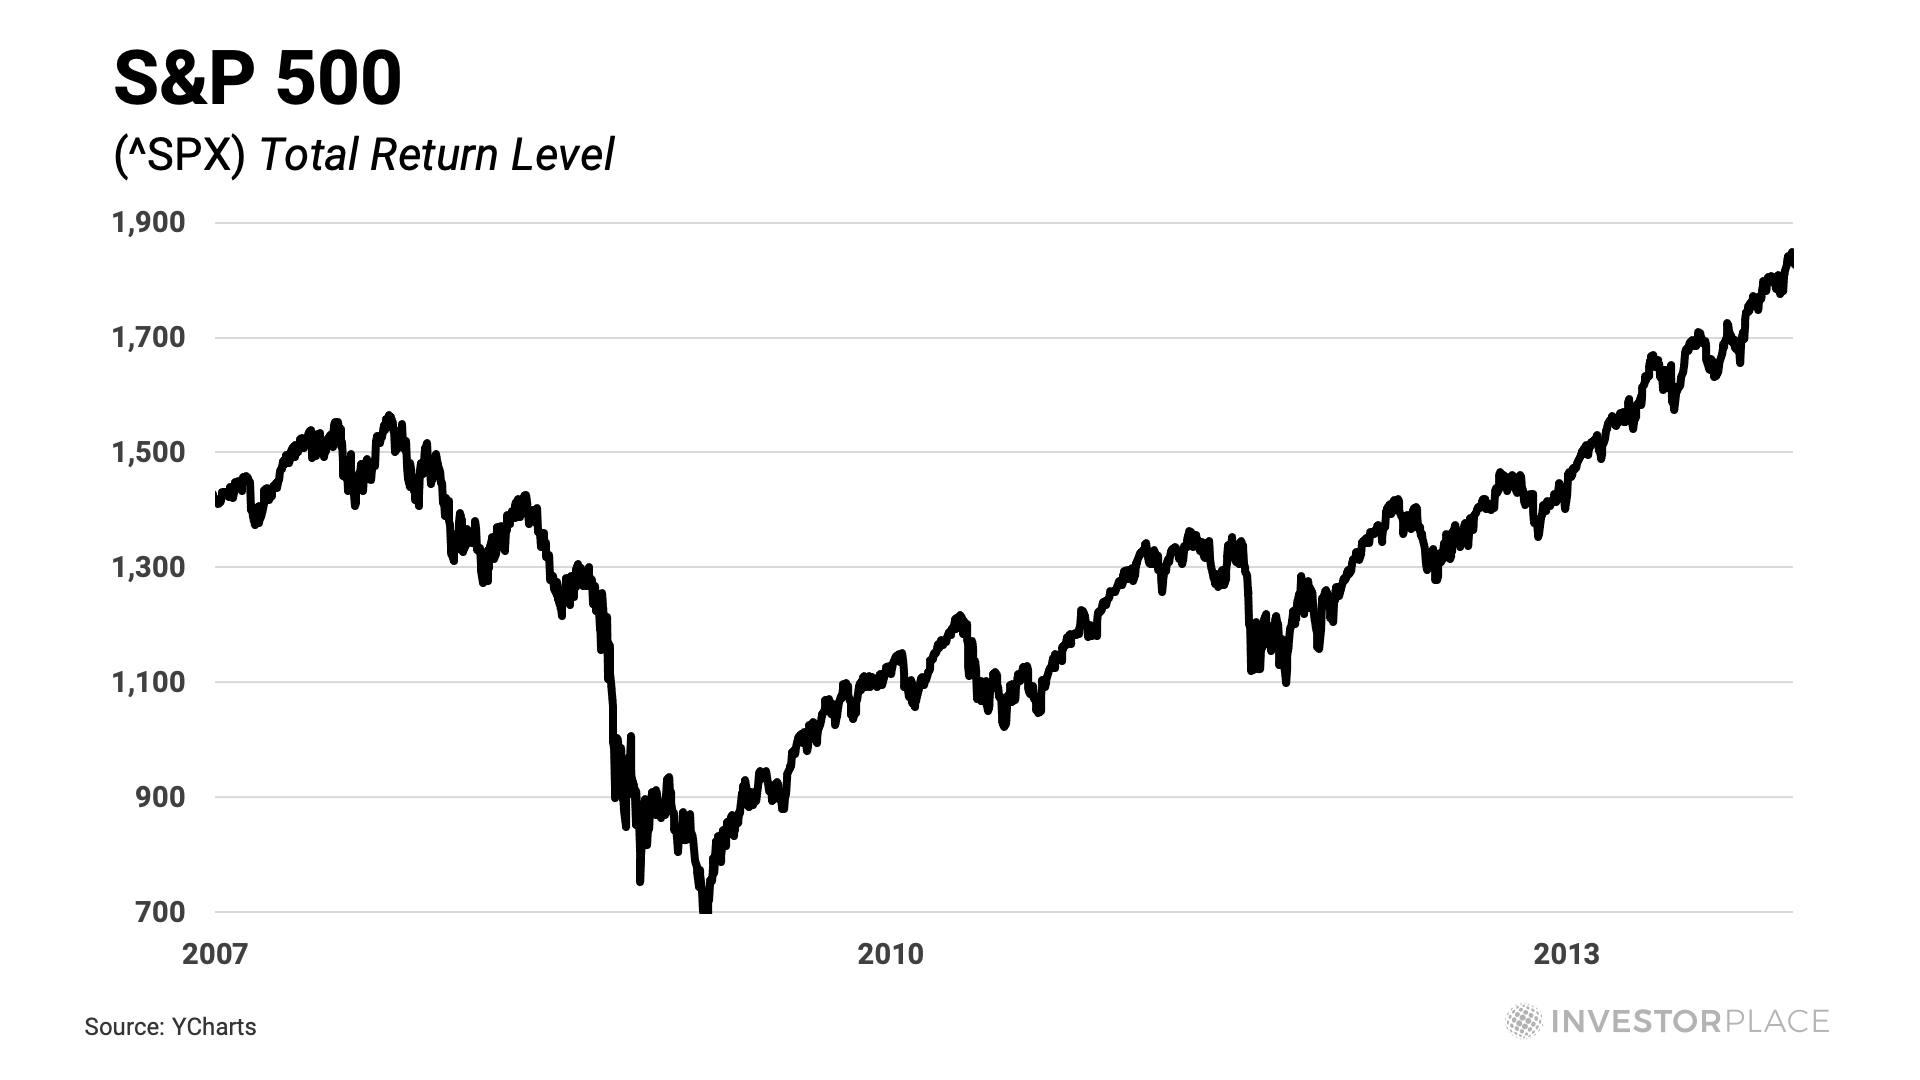 S&P 500 total return from 2007 through 2013